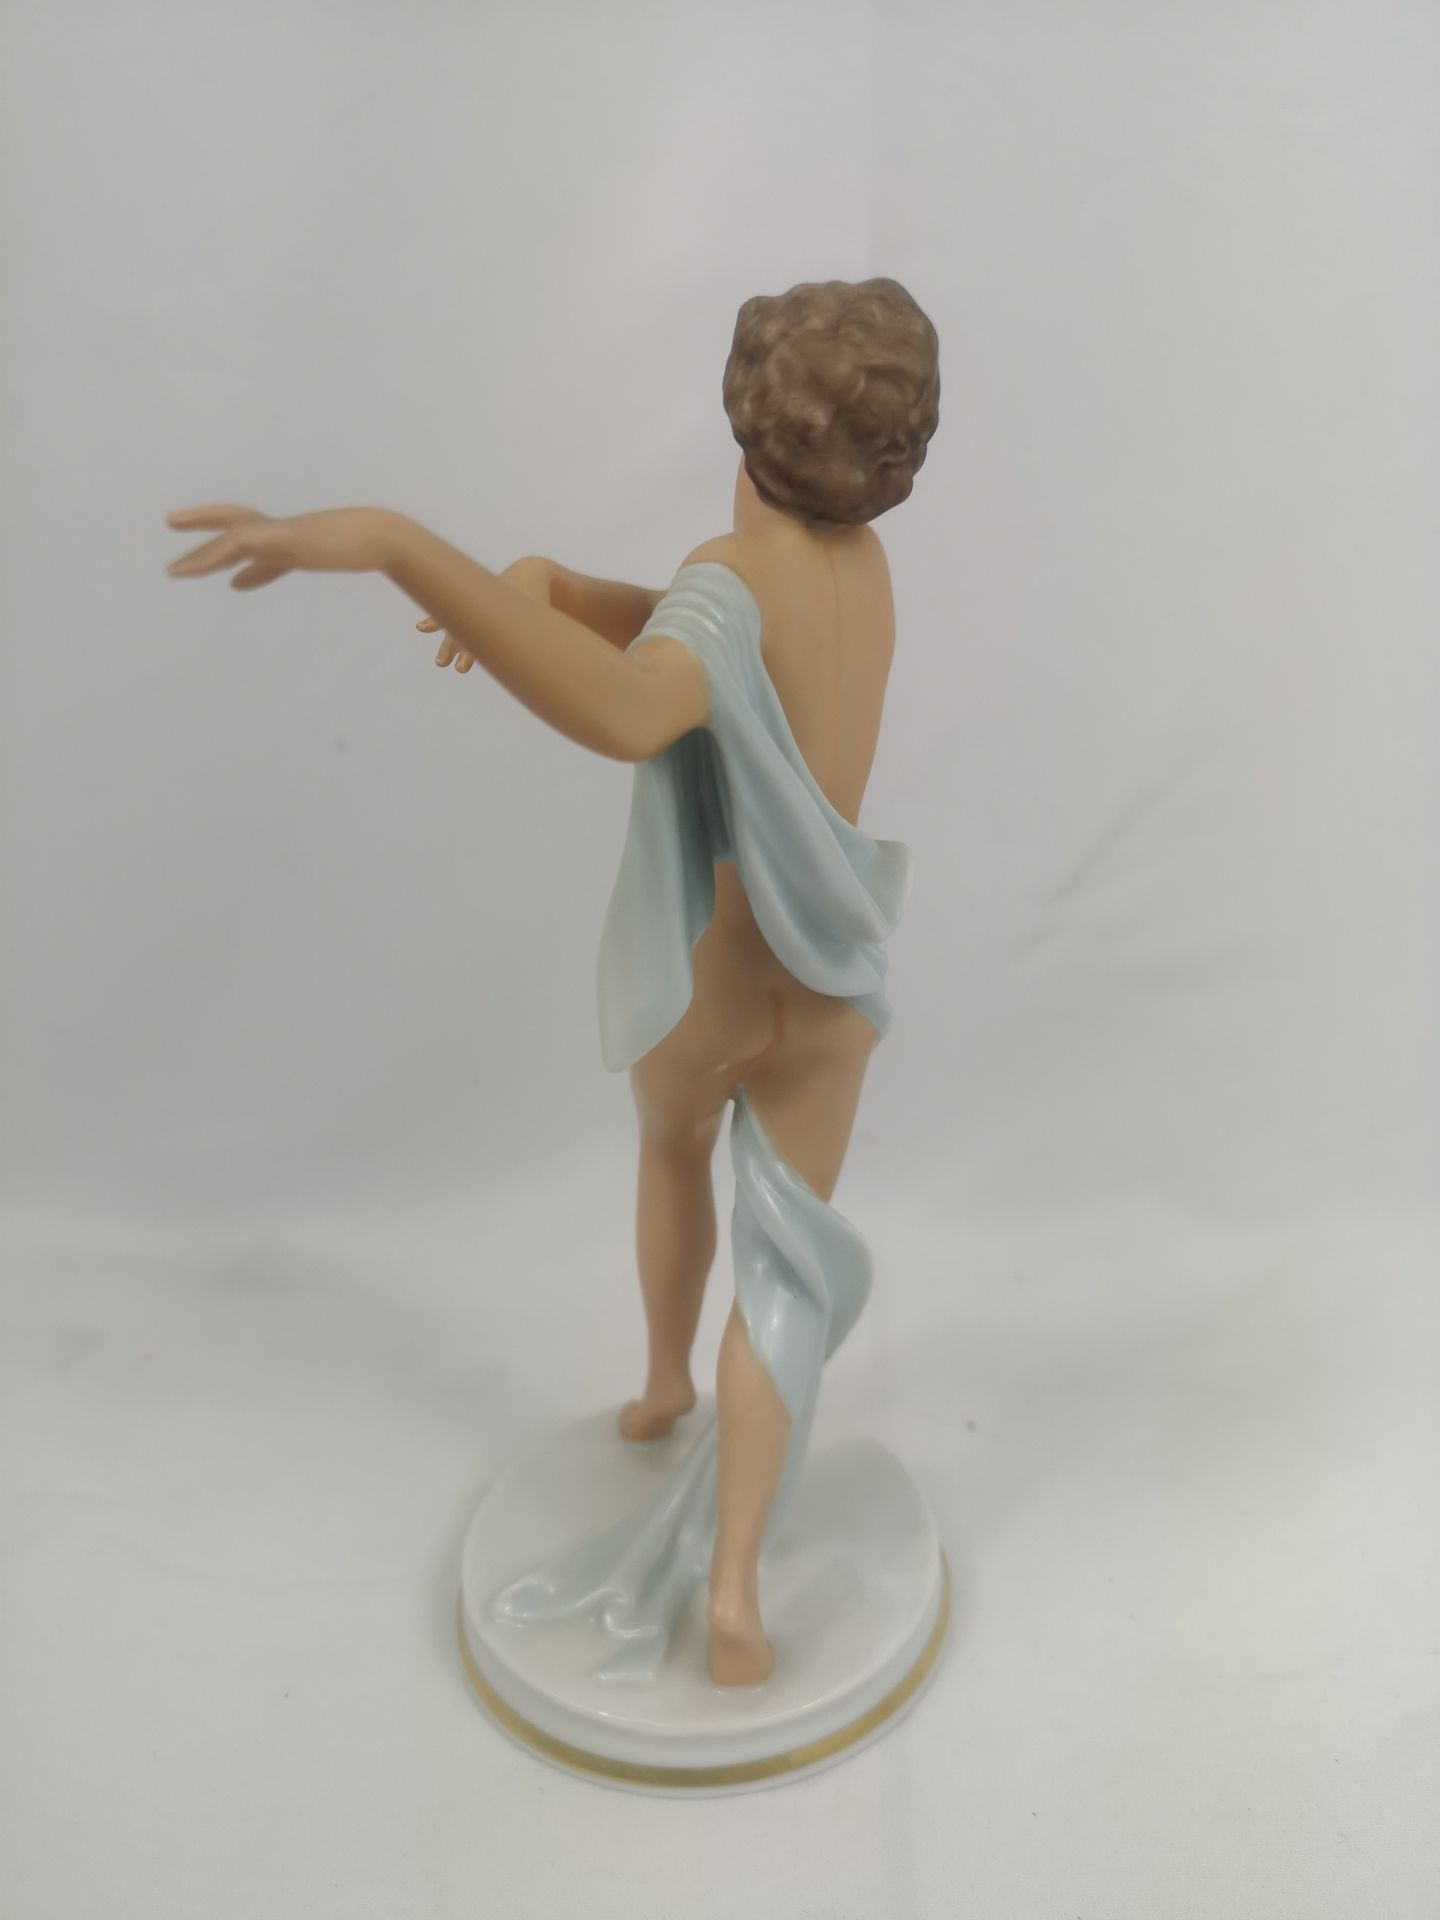 Art deco style Rosenthal figurine together with a Goldscheider figurine - Image 6 of 6